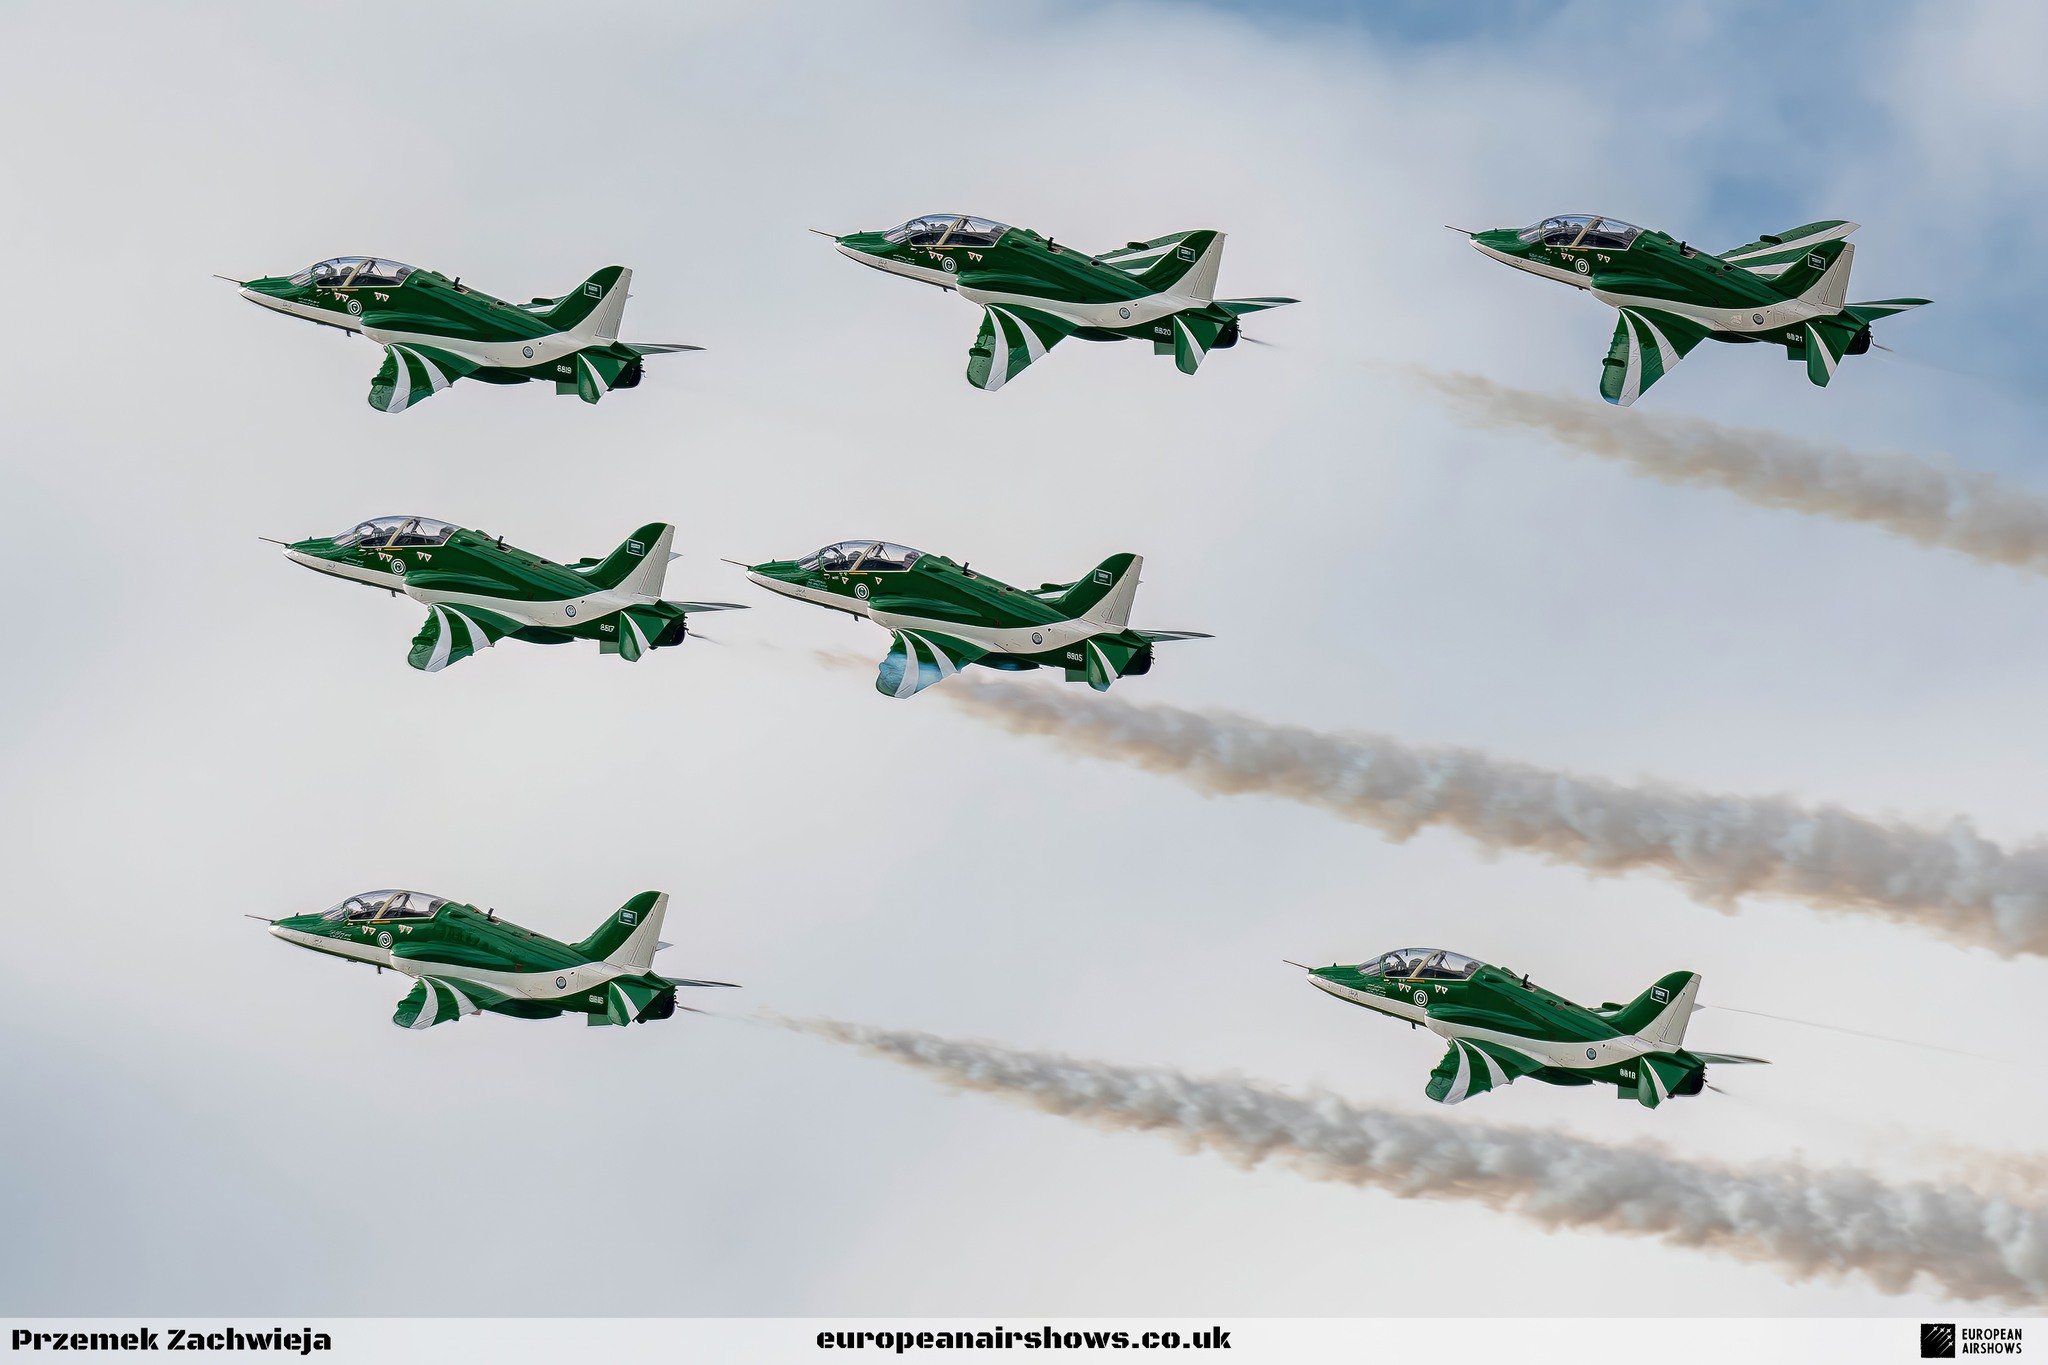 𝐀𝐈𝐑𝐒𝐇𝐎𝐖 𝐍𝐄𝐖𝐒: The organizers of the Athens Flying Week have announced that the Saudi Hawks, the aerobatic team of the Royal Saudi Air Force, will be returning to the event on September 14-15, 2024. 

Read more on our website by clicking th